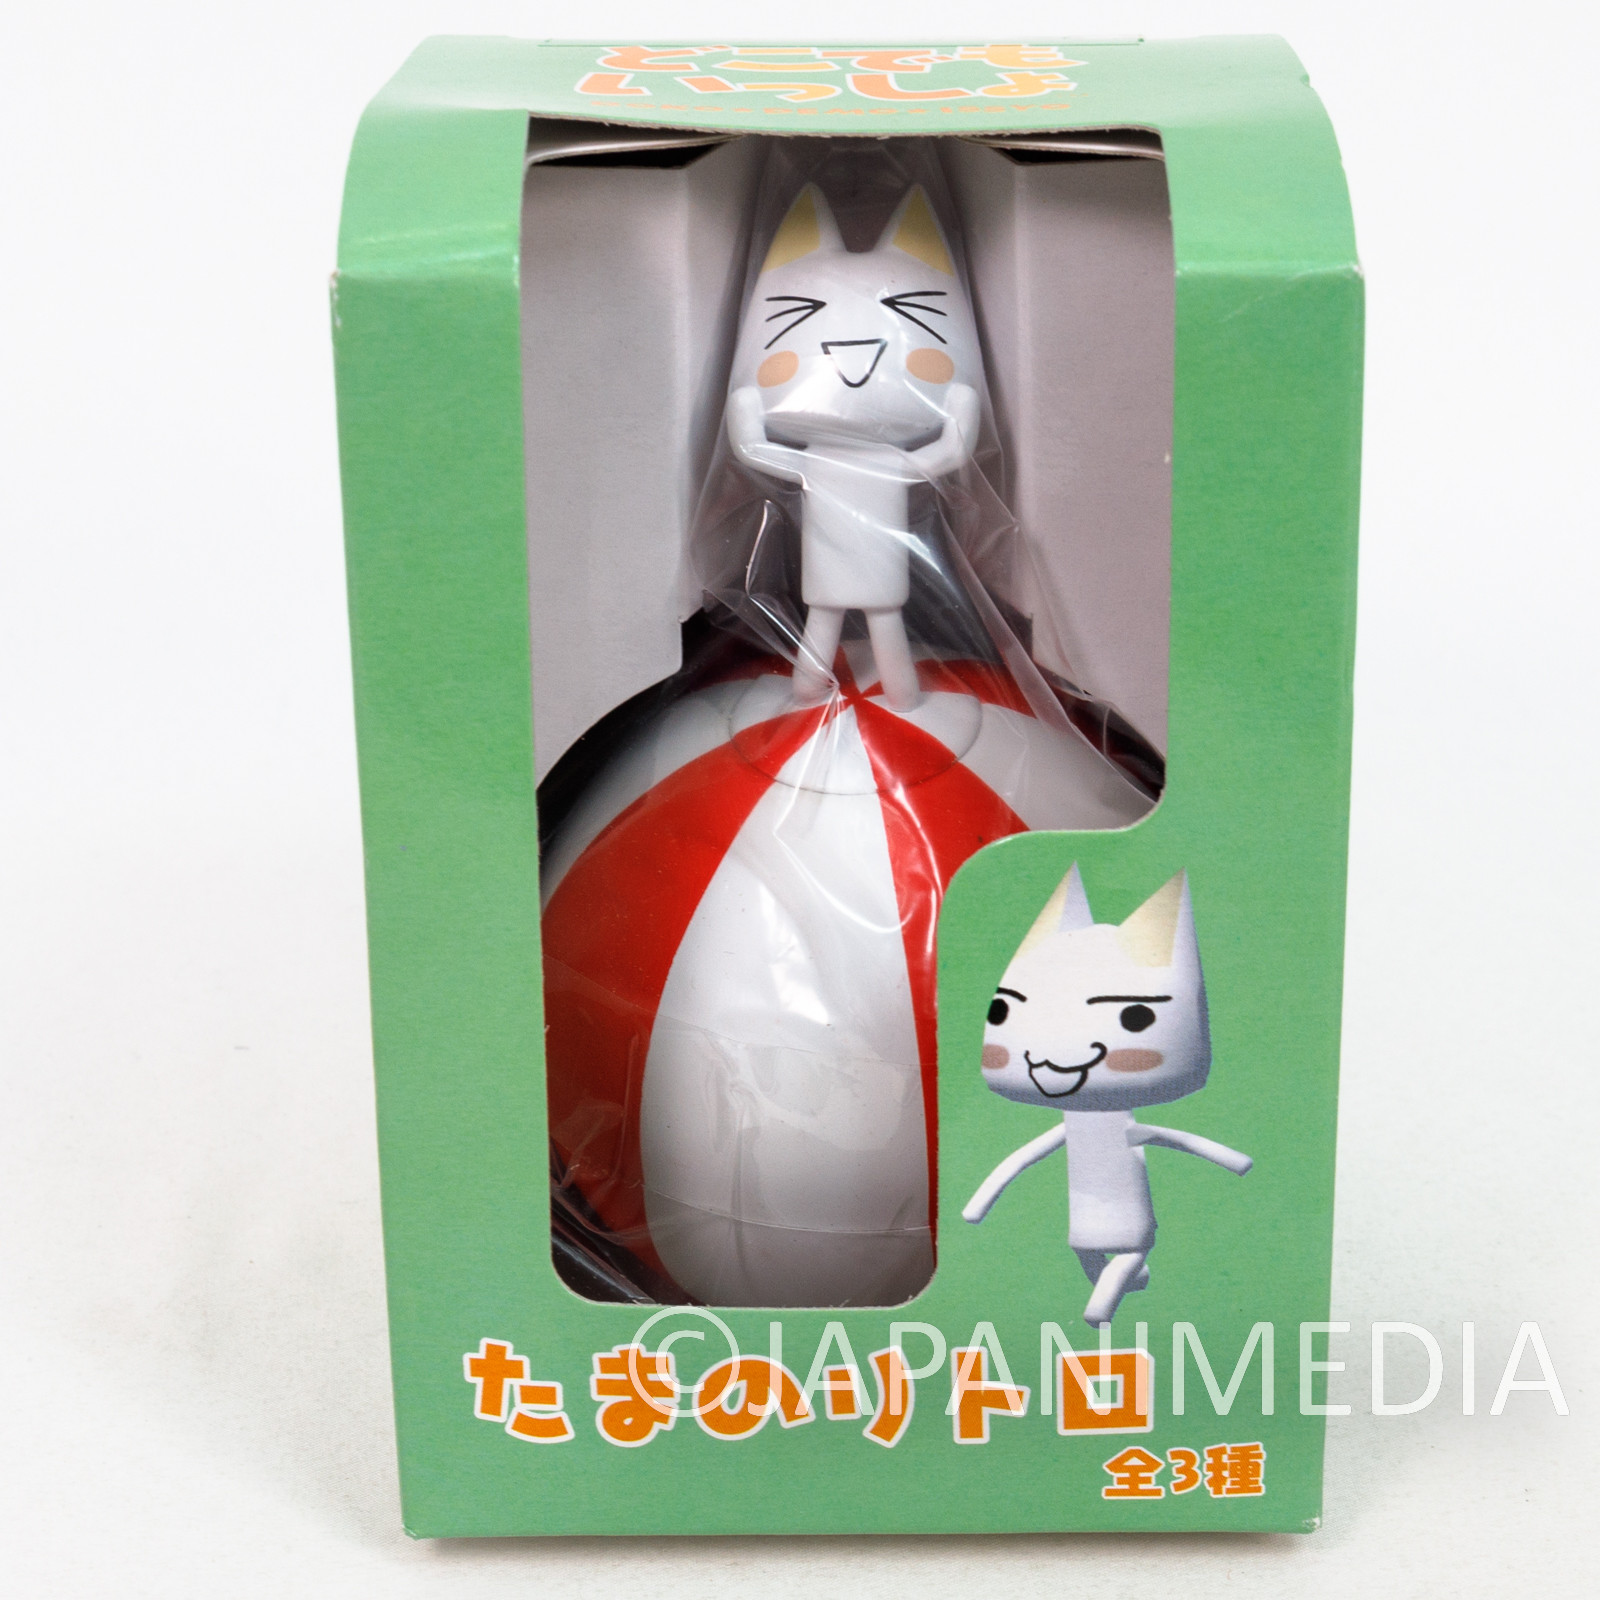 Sony Cat Doko Demo Issyo TORO INOUE Ball riding Figure Roly-Poly Toy #2